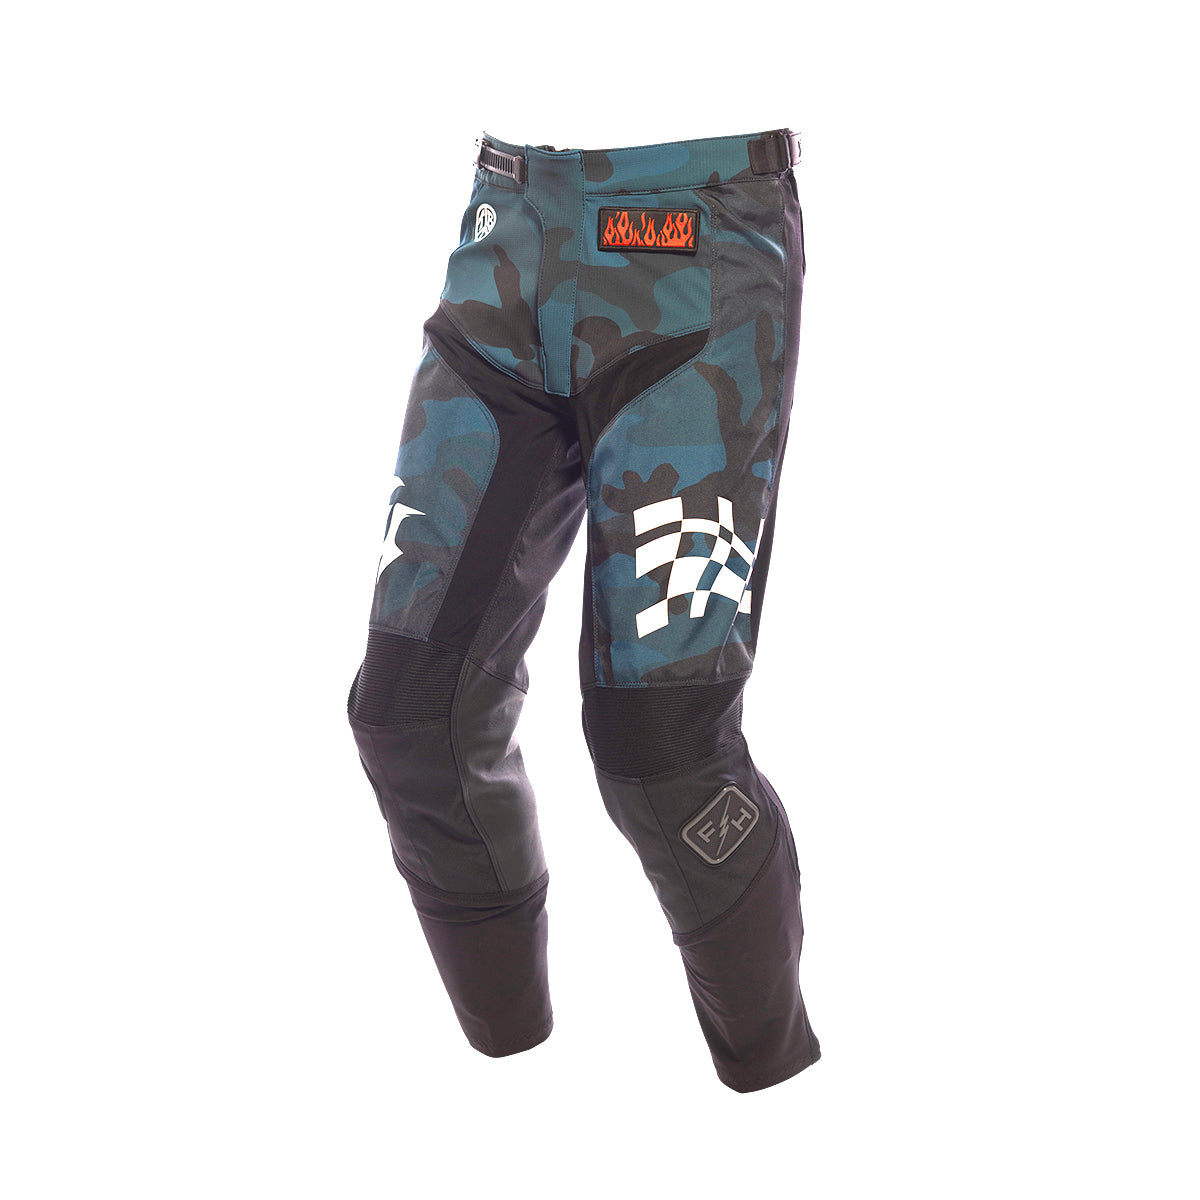 Grindhouse Bereman Youth Pant - Blue Camo